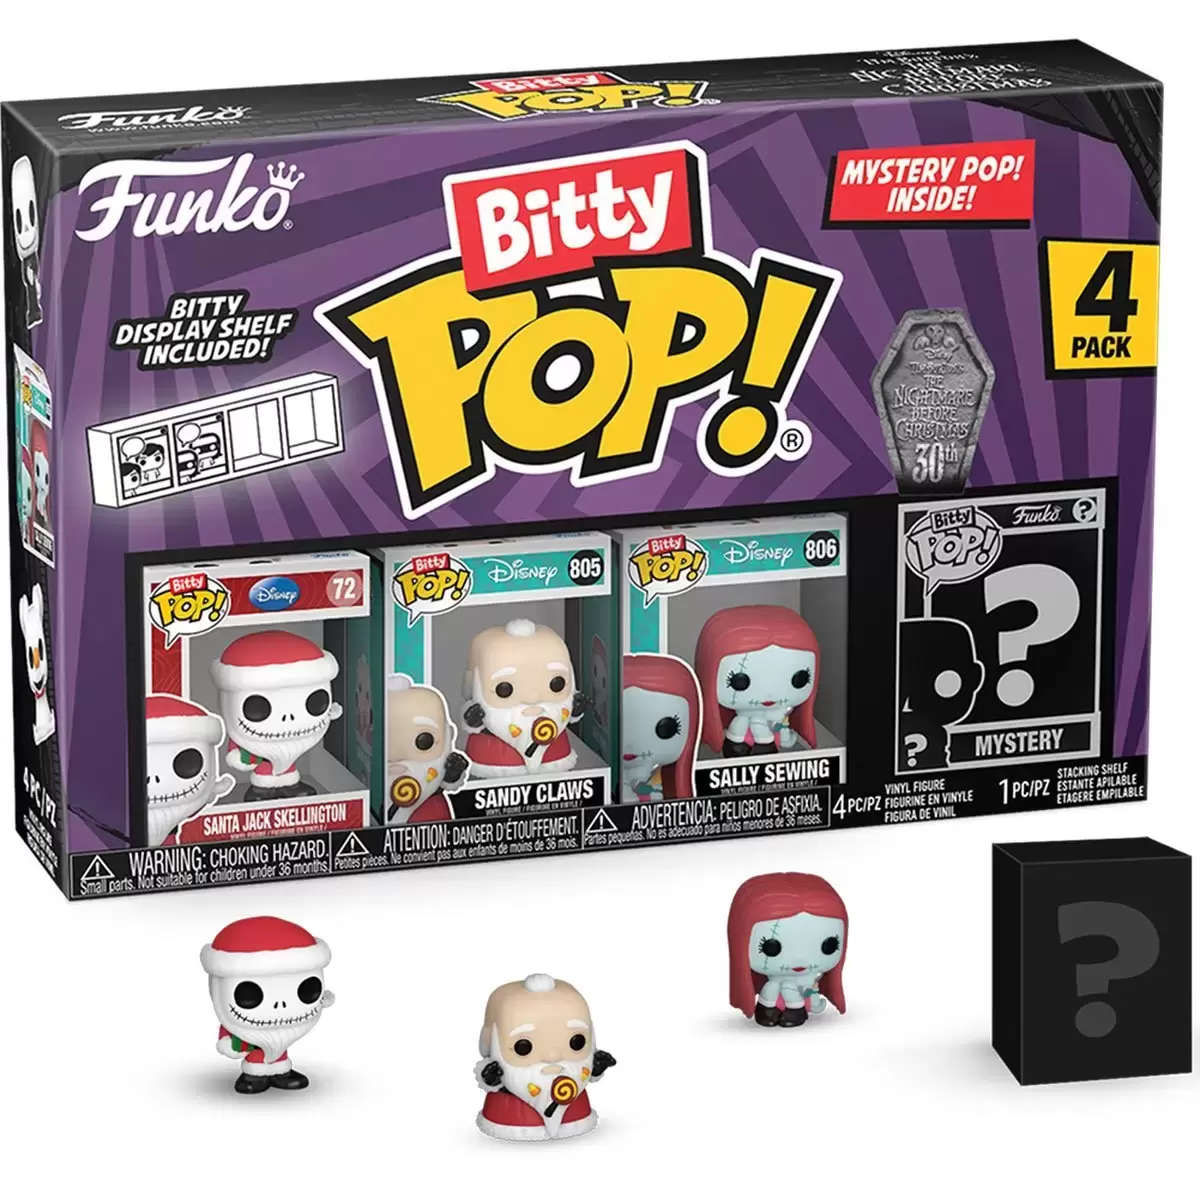 Bitty POP! - The Nightmare Before Christmas - Santa Jack Skellington, Sandy Claws, Sally Sewing & Mystery